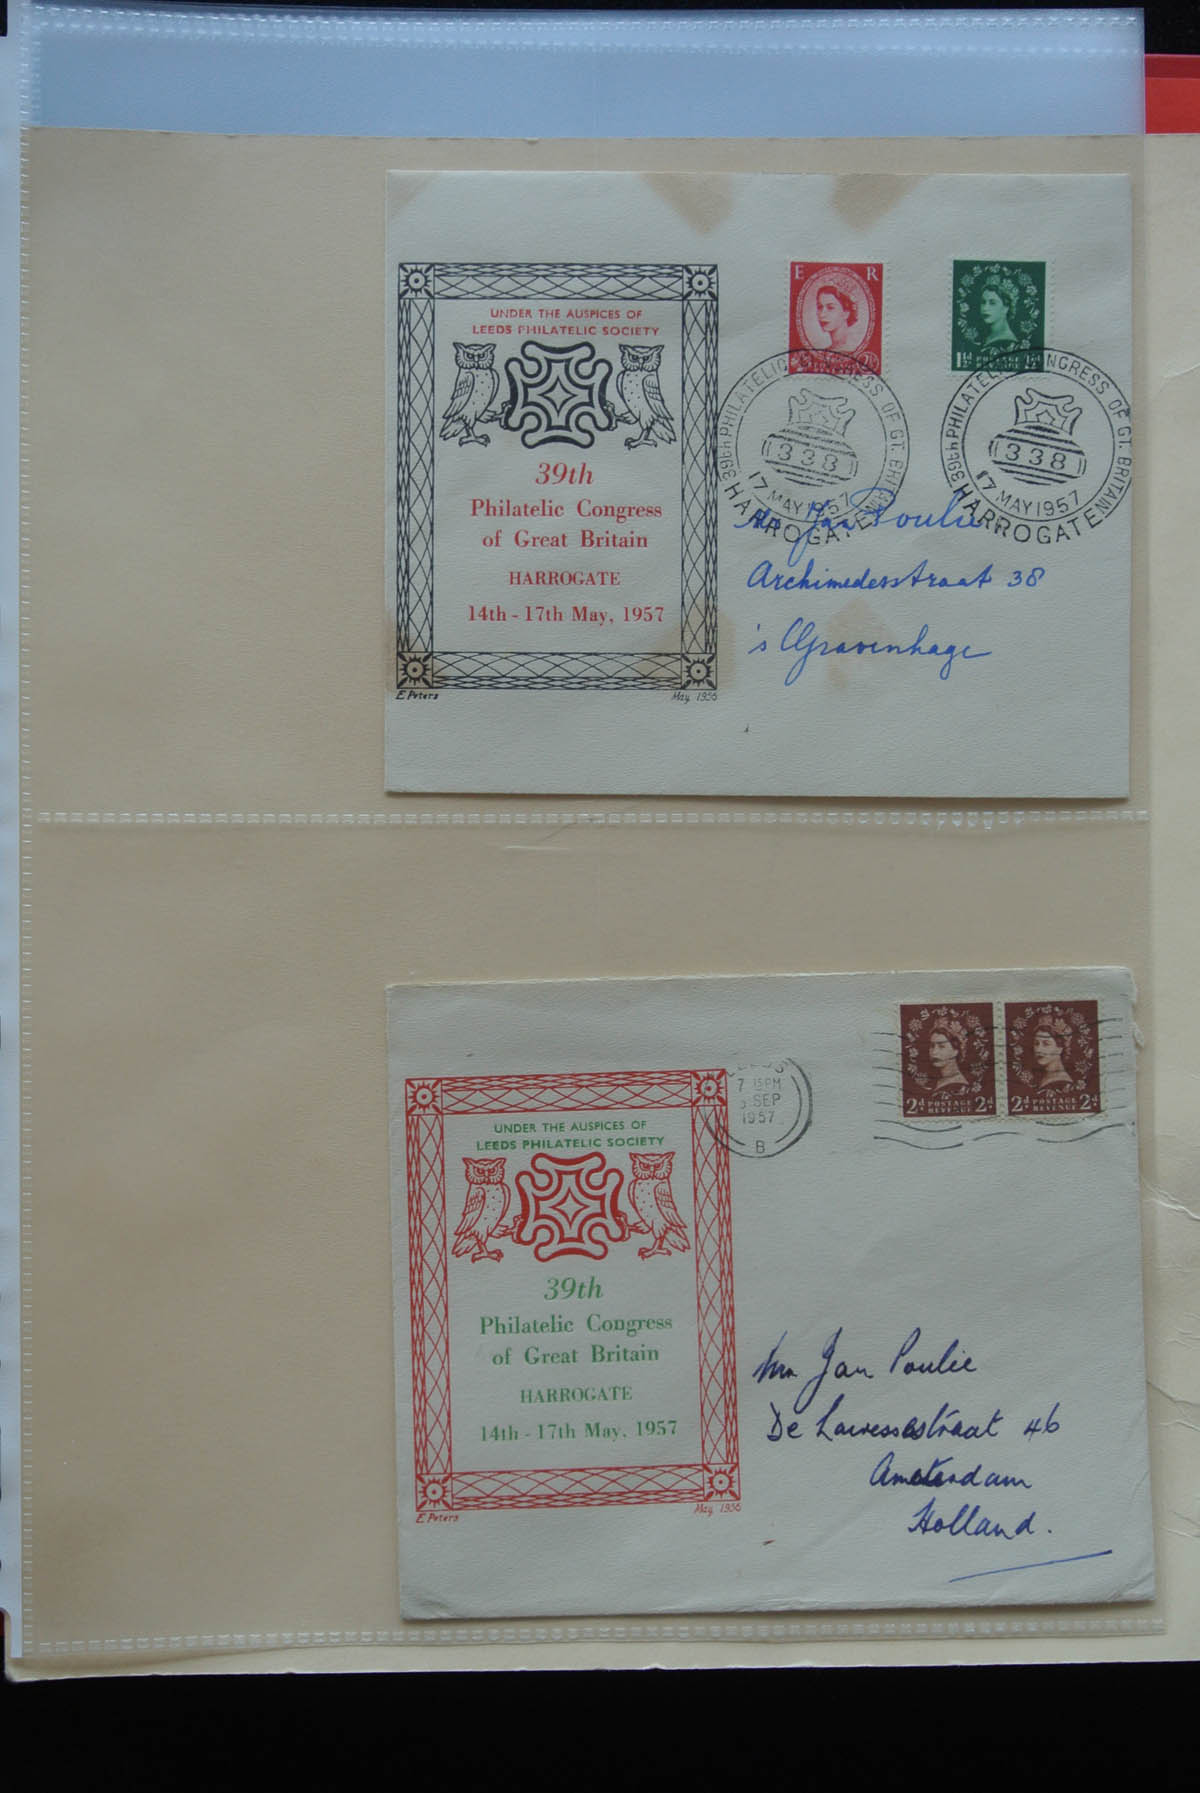 25884 050 - 25884 Europa covers '50s.